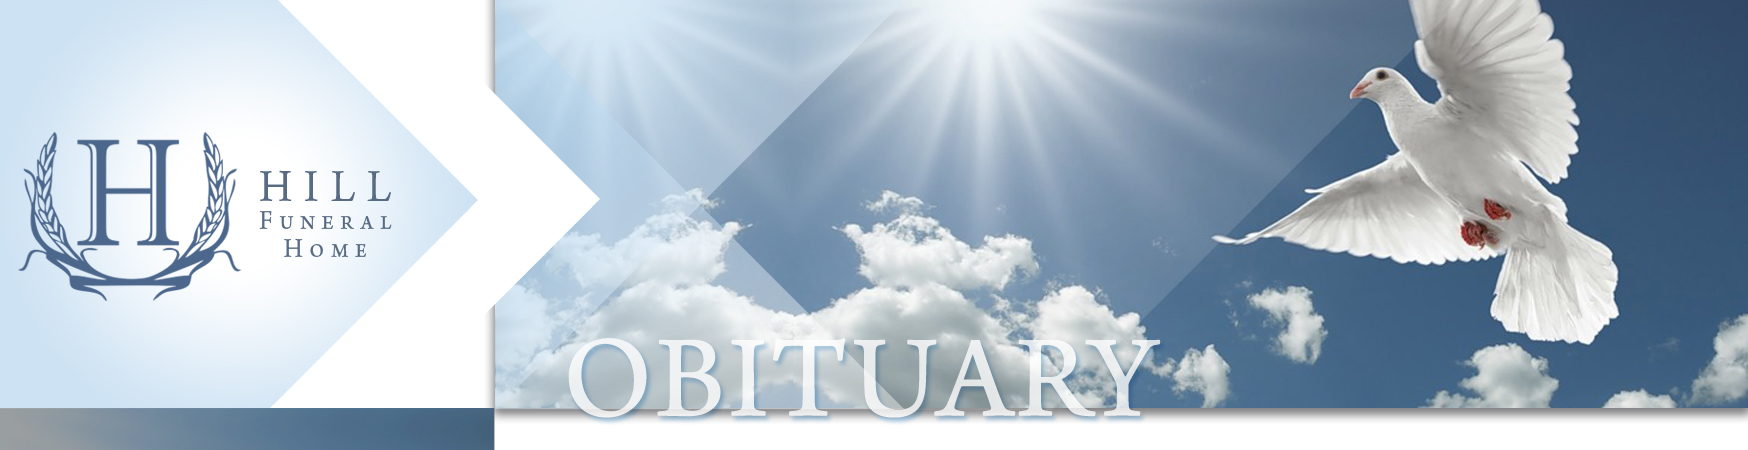 Mary Elizabeth Bresnahan Obituary - Hill Funeral Home